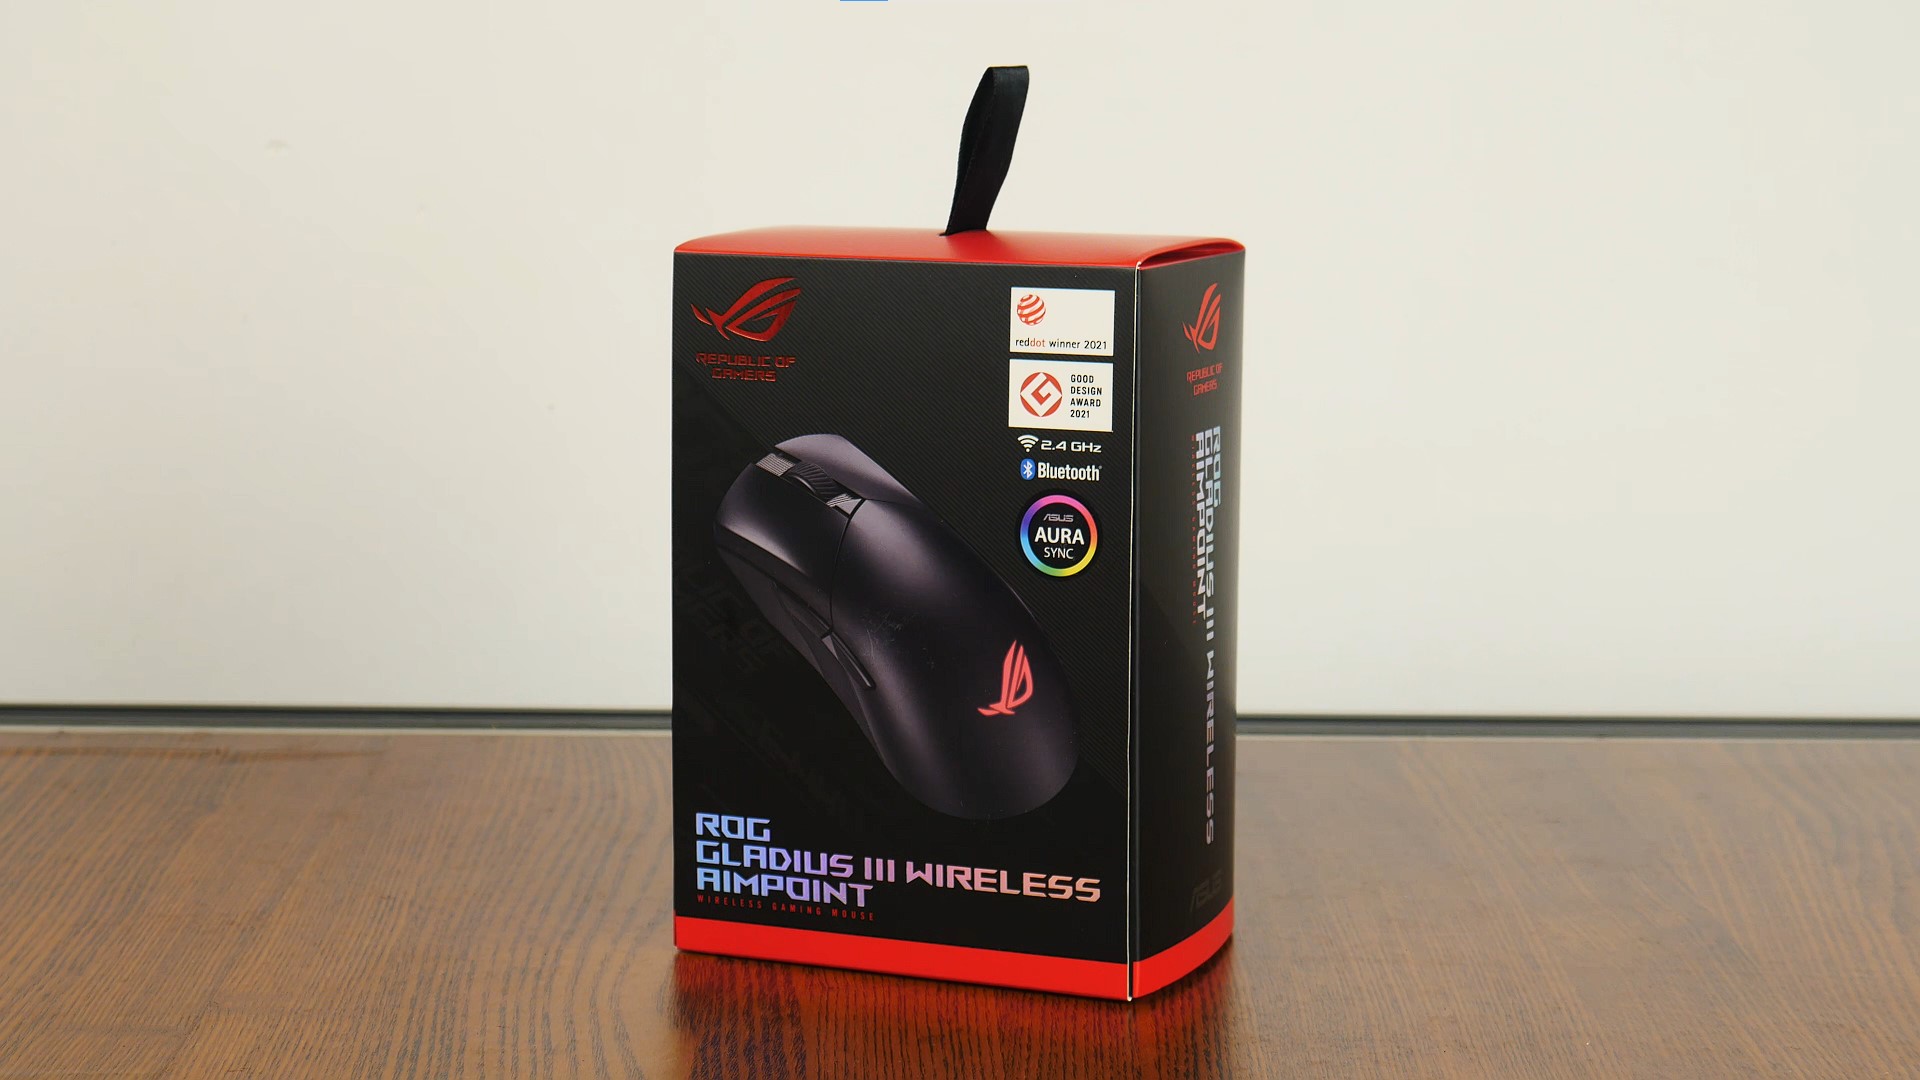 ASUS ROG Gladius III Wireless AimPoint Packaging (1)